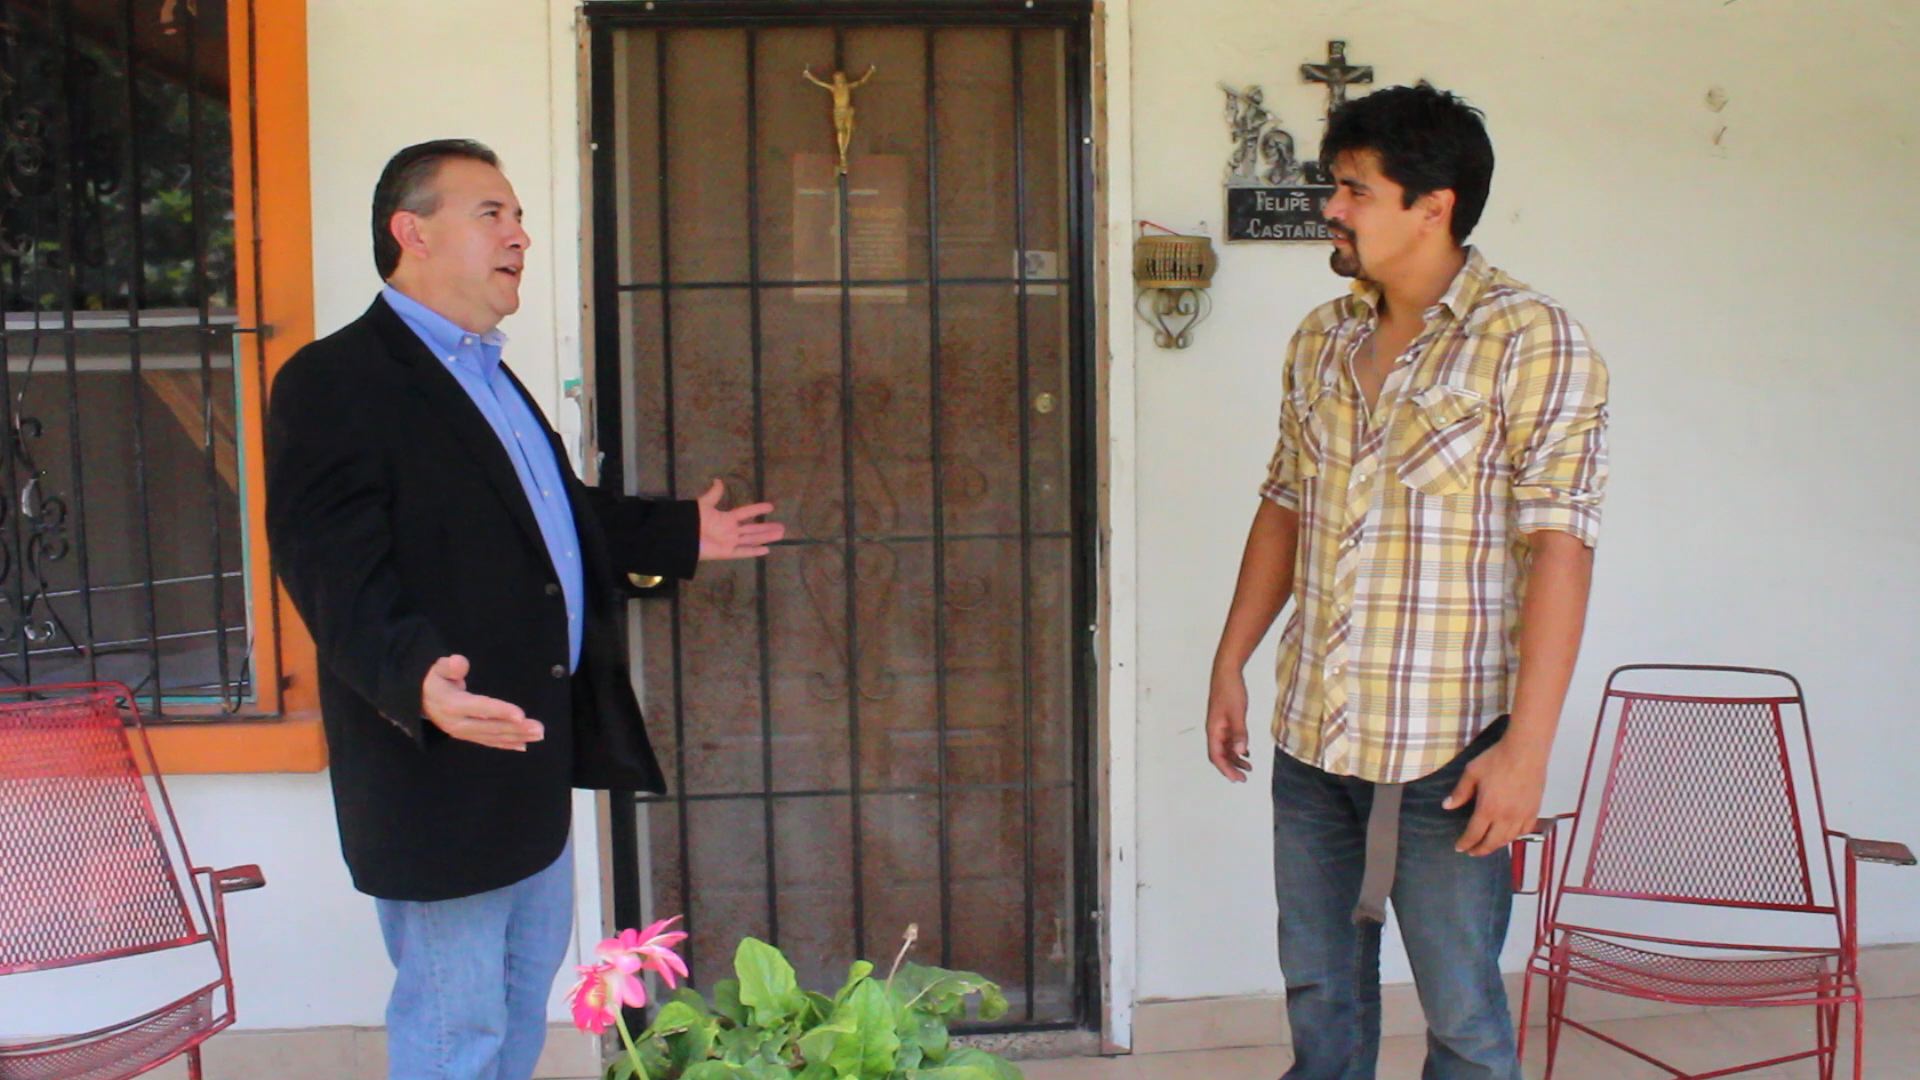 Harris, Omar Trevino (L) meets up with meets up with Robert, DAVID CID in the film 